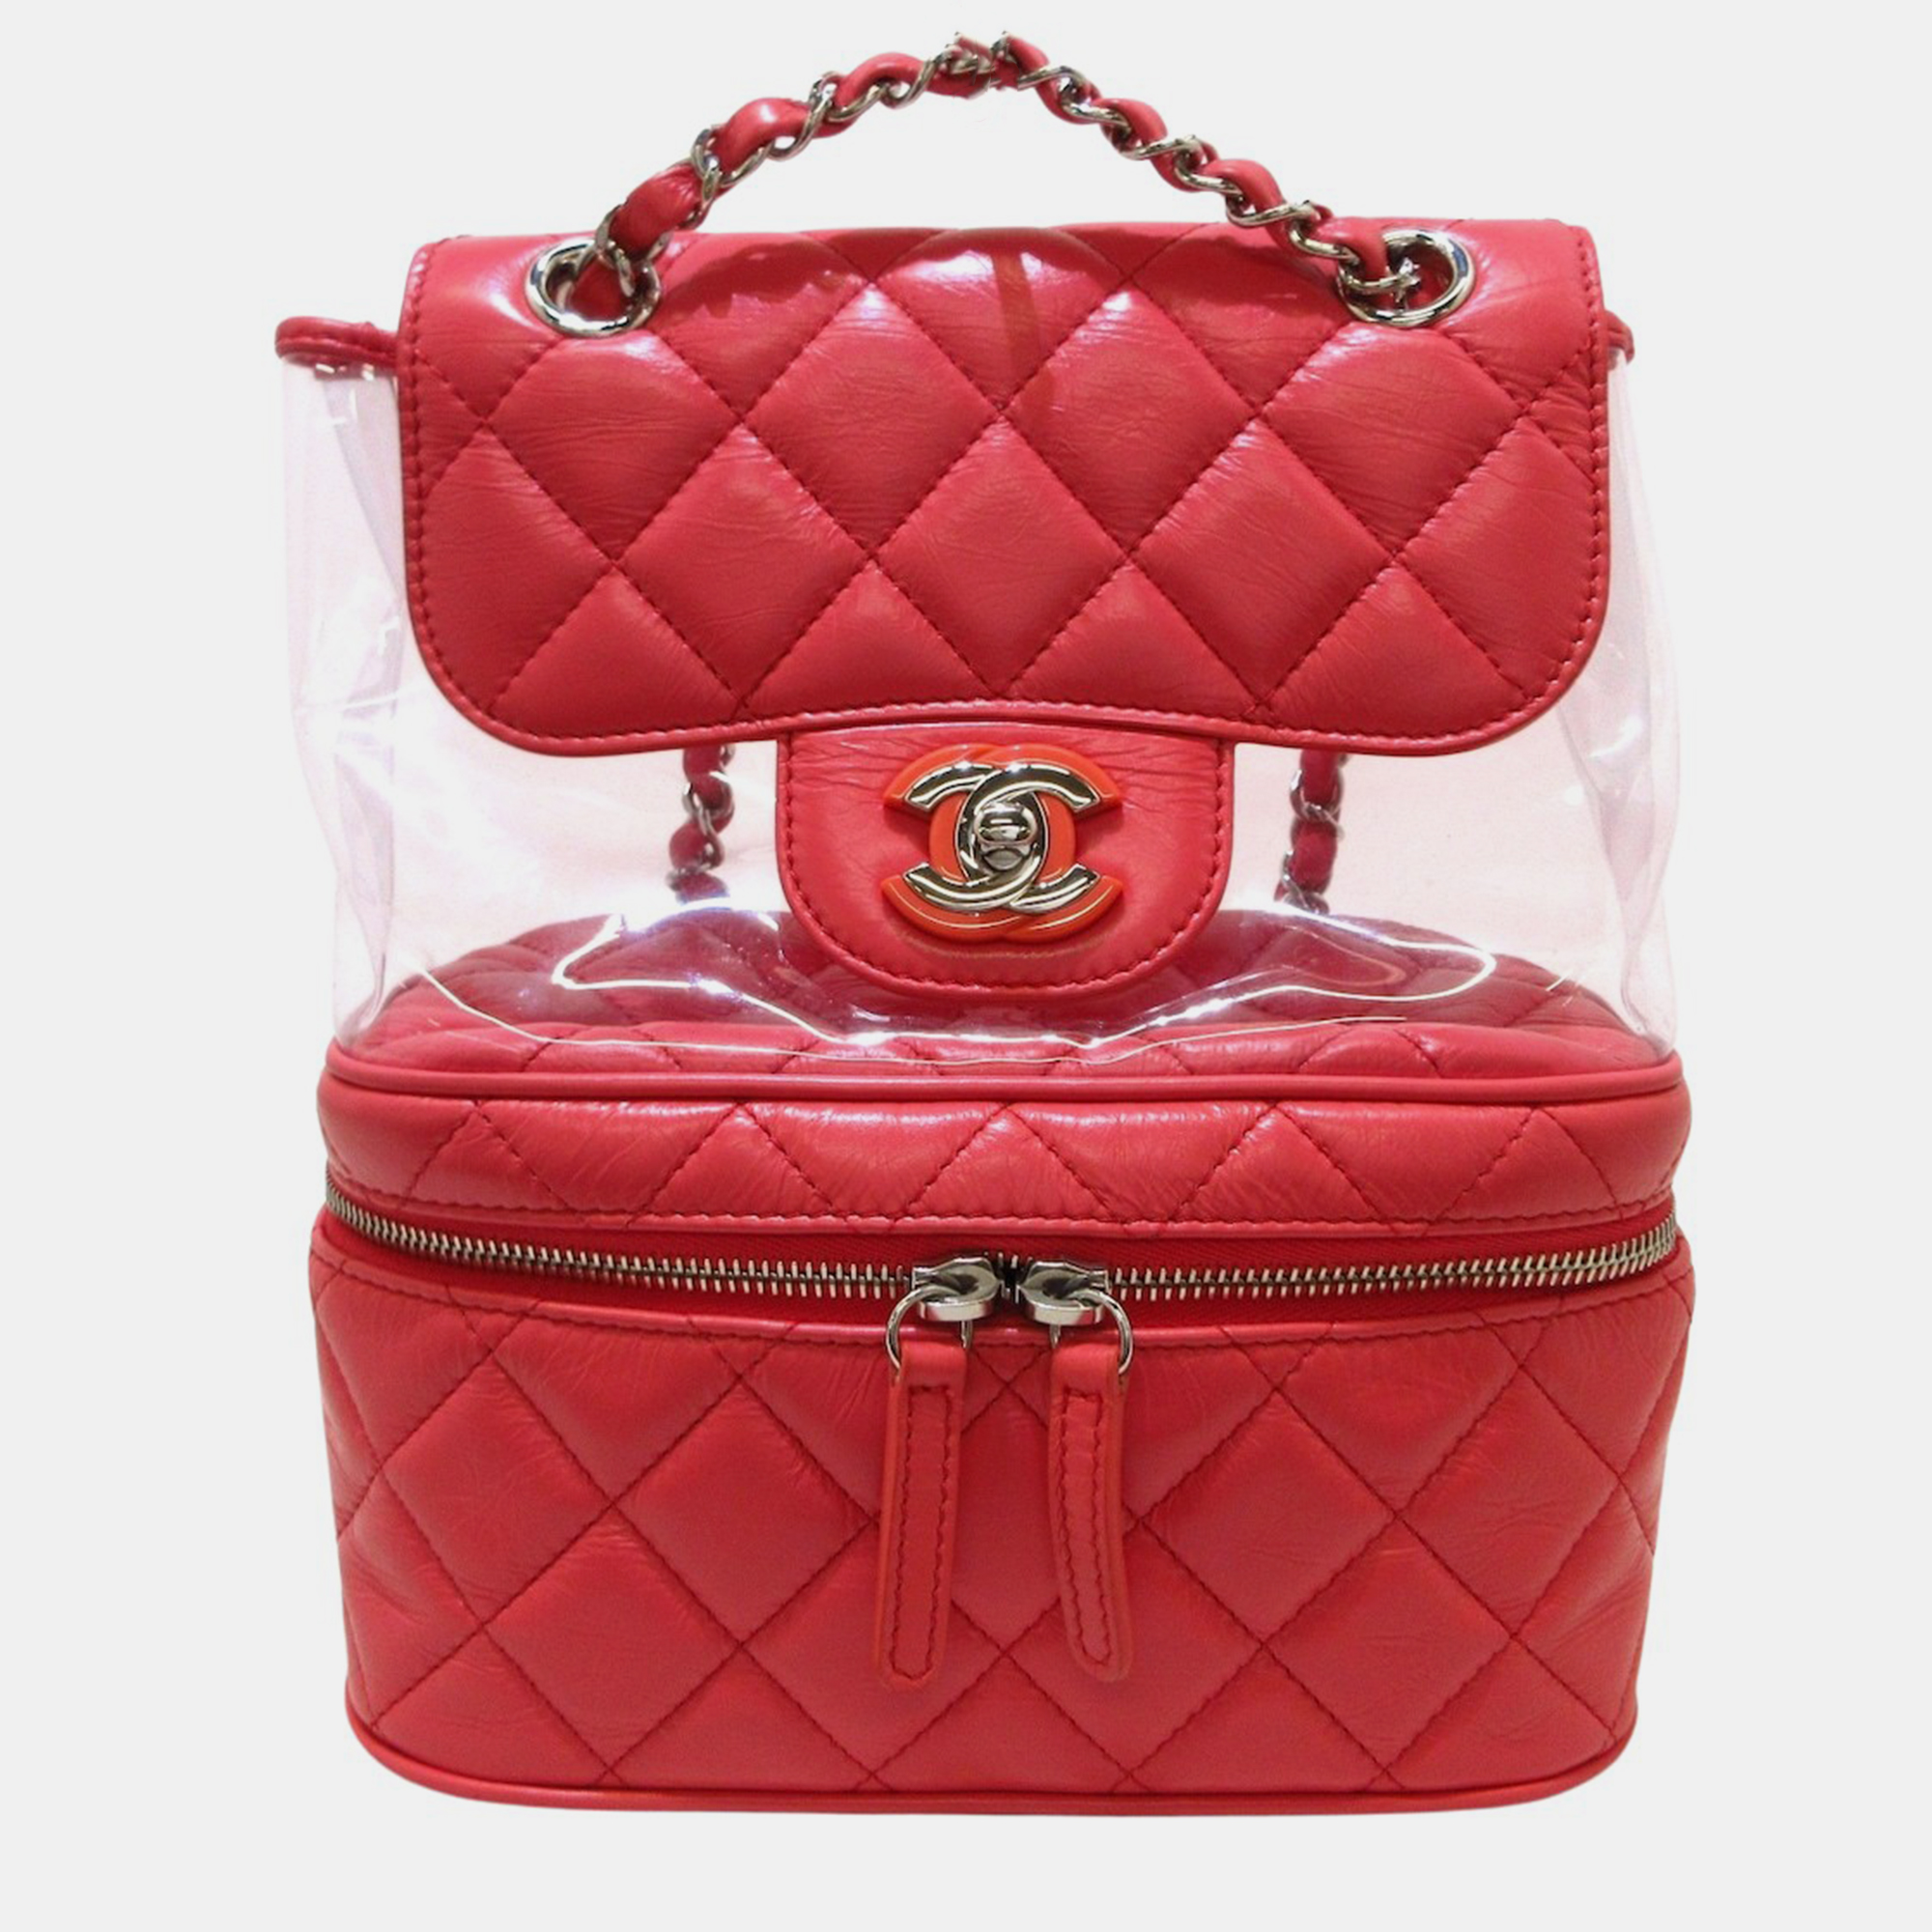 Chanel Red Leather CC Backpack Bag